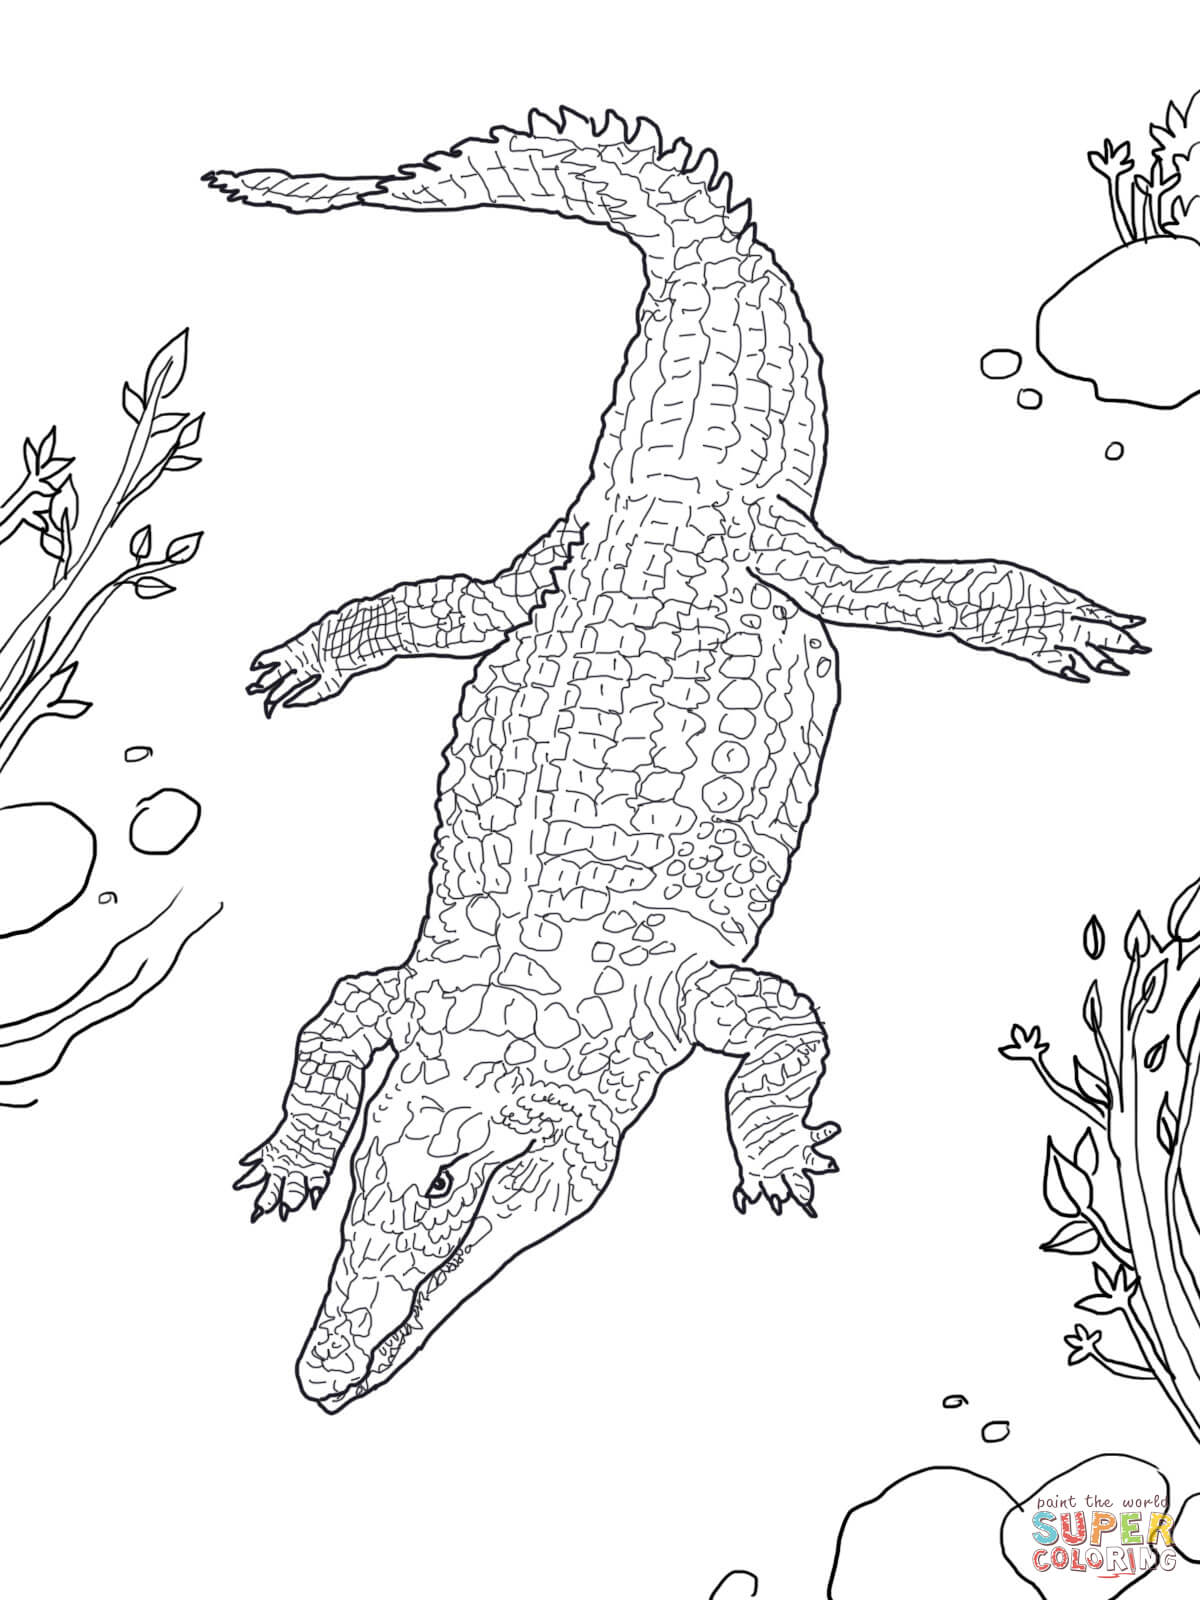 Baby Crocodile coloring page | Free Printable Coloring Pages